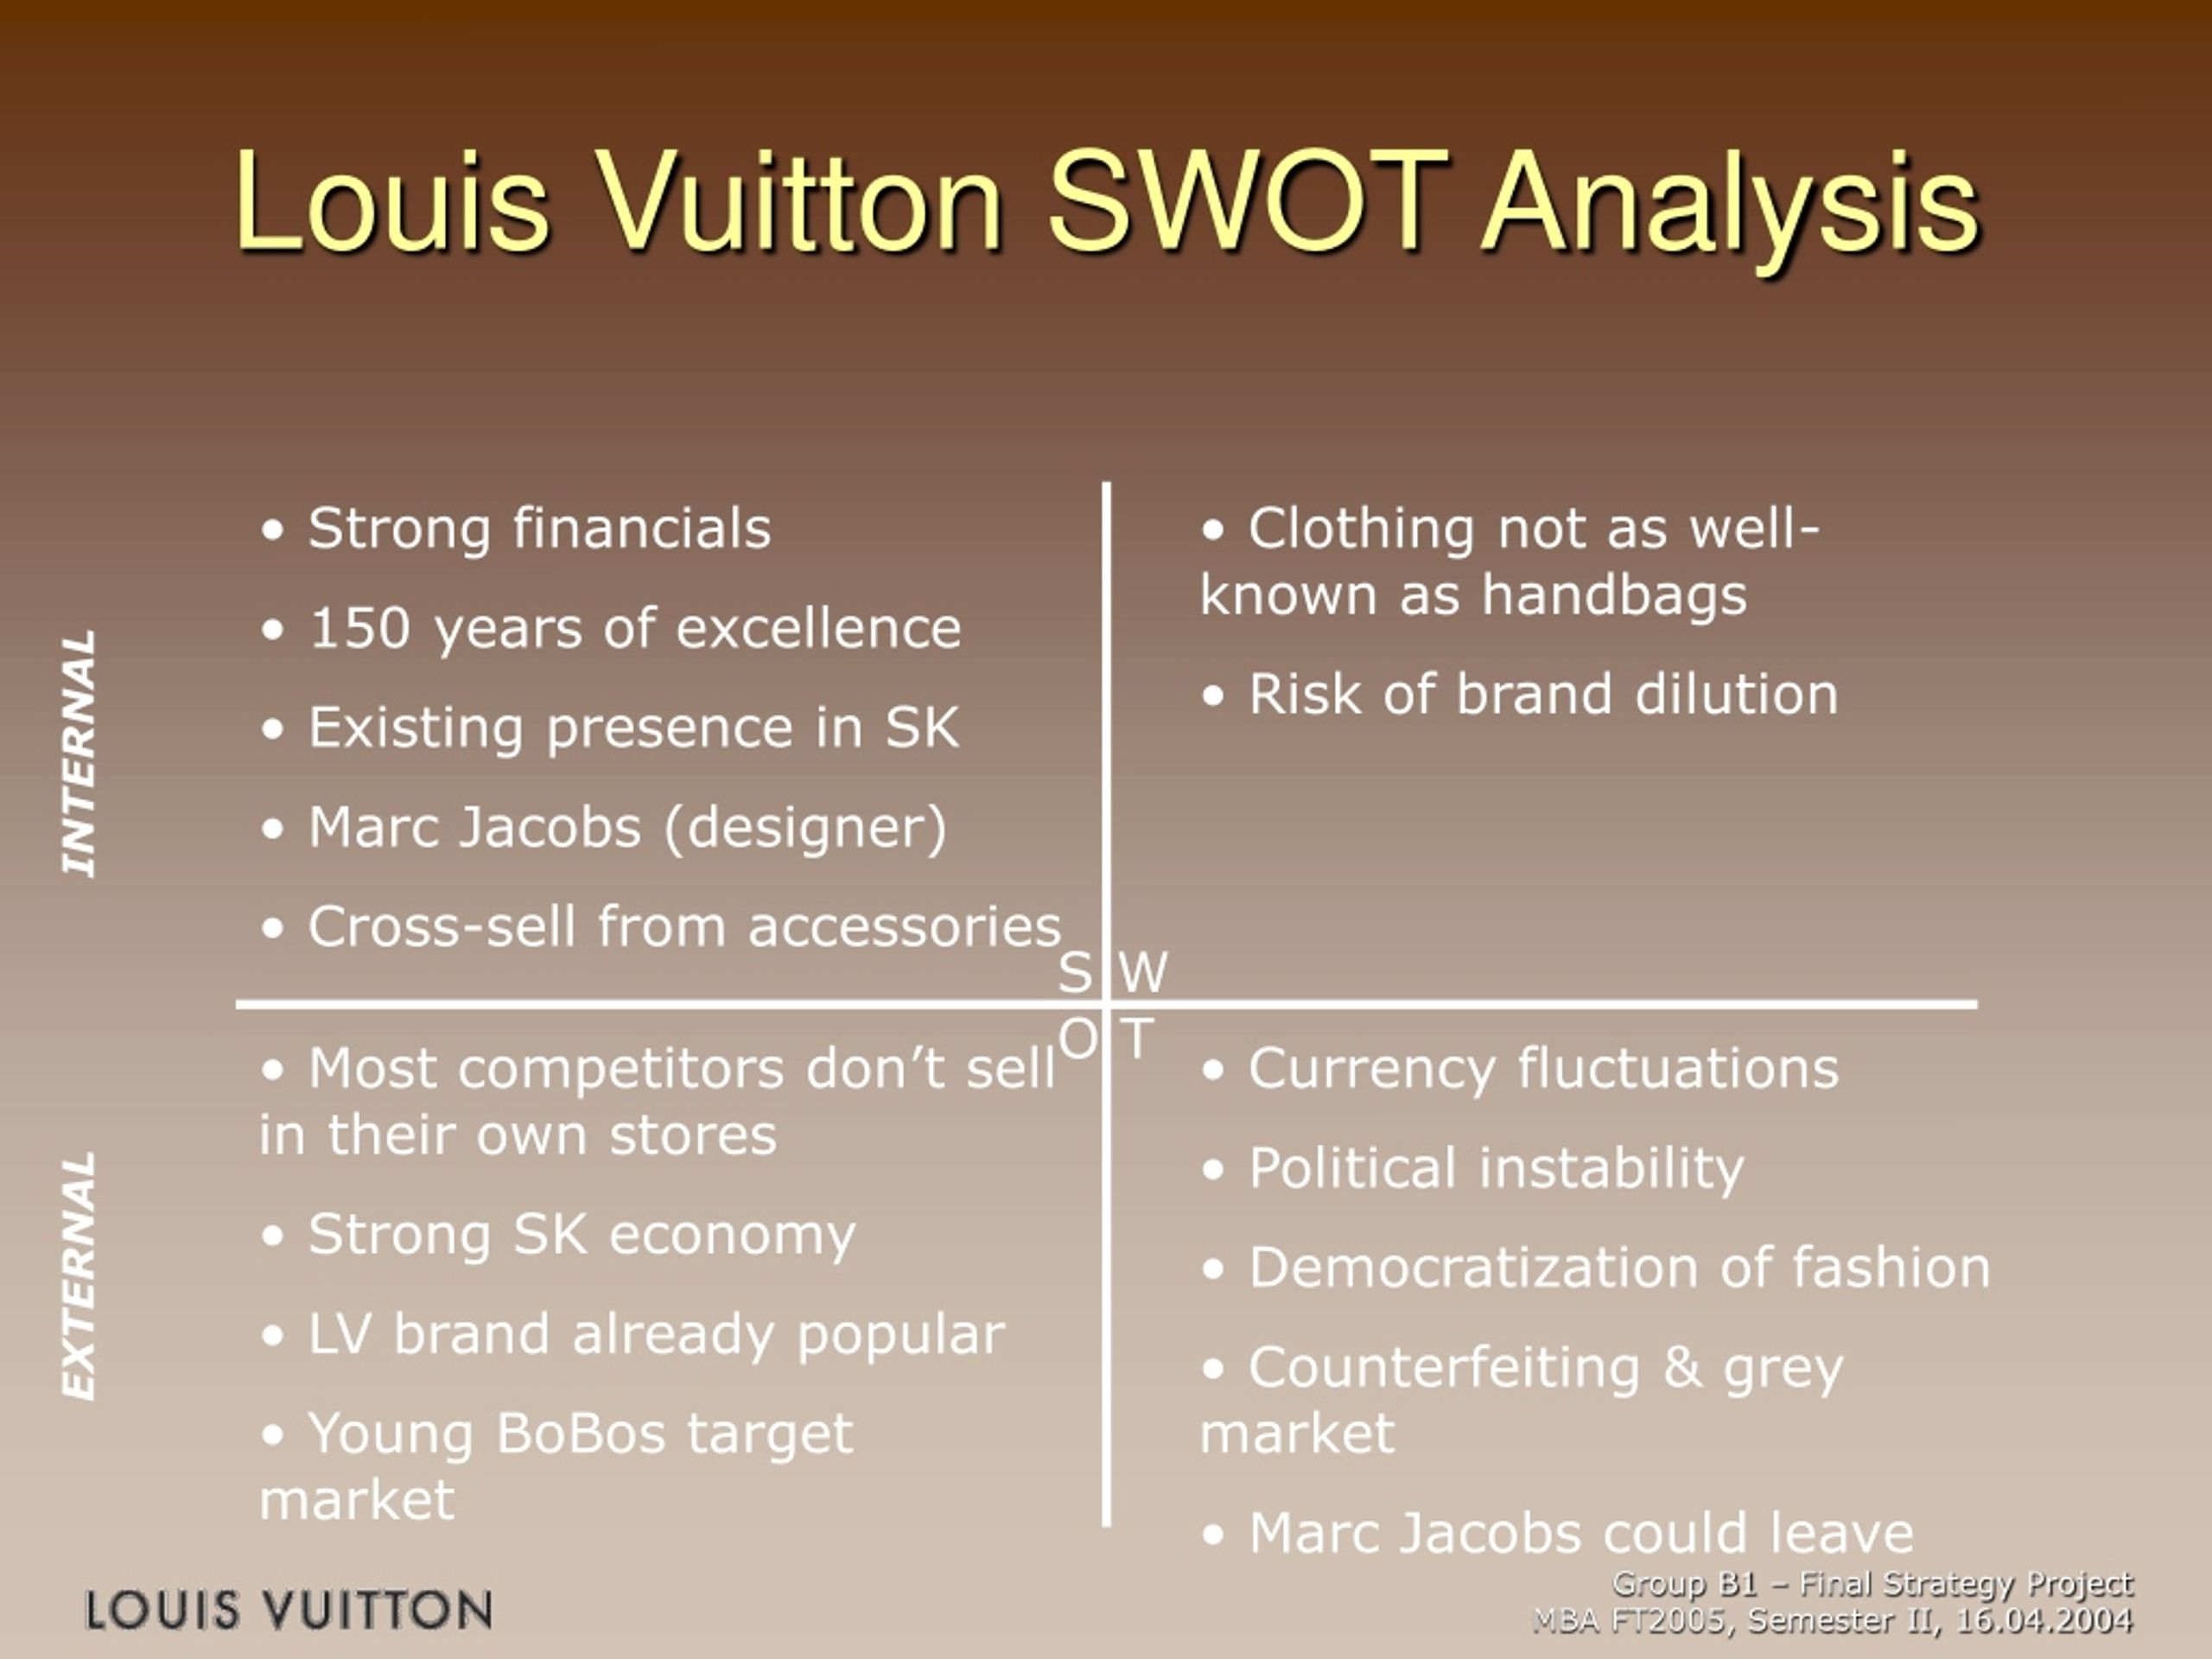 Marketing Strategy Of Louis Vuitton